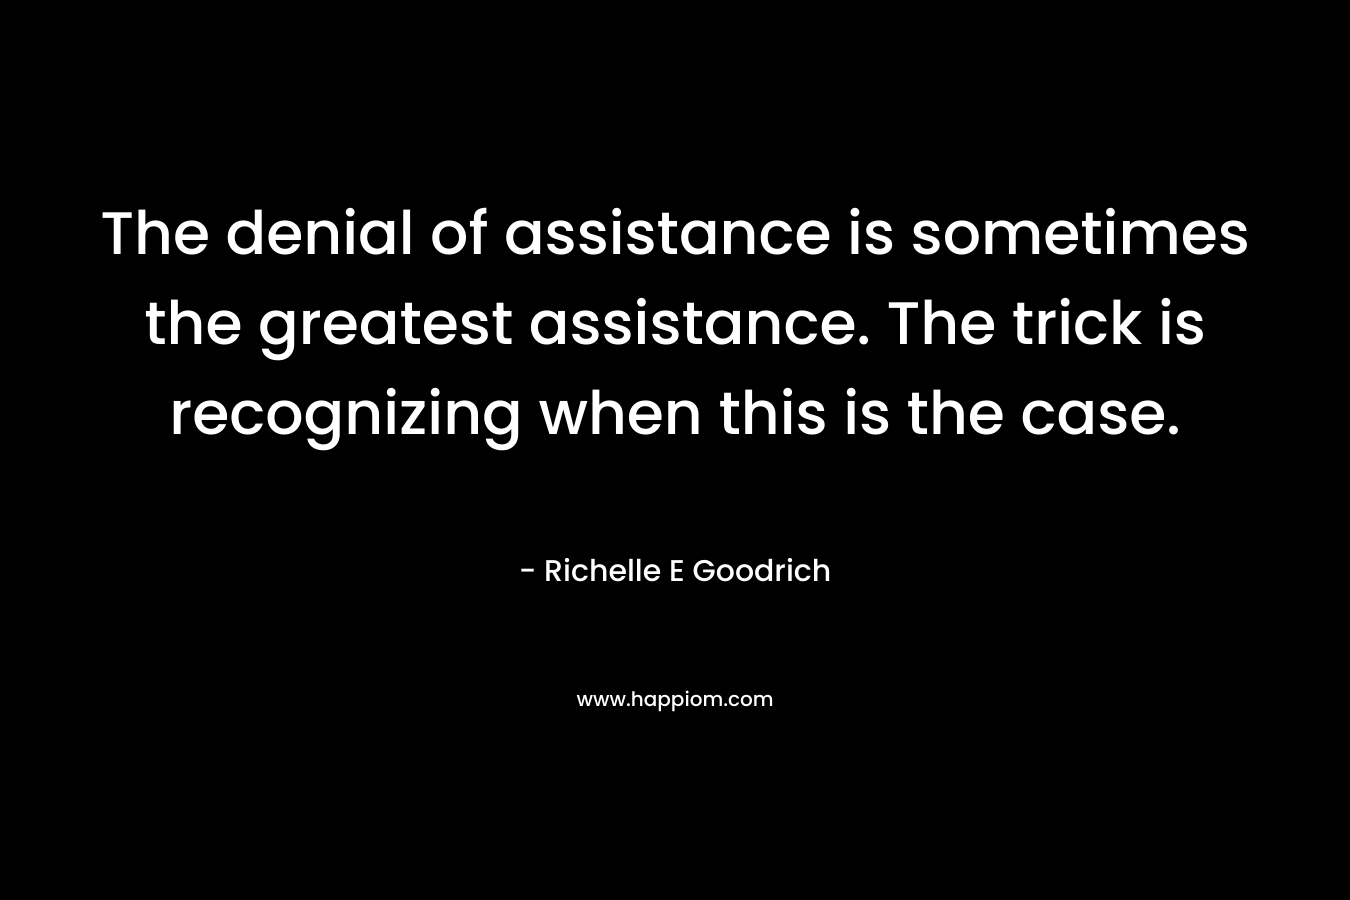 The denial of assistance is sometimes the greatest assistance. The trick is recognizing when this is the case. – Richelle E Goodrich